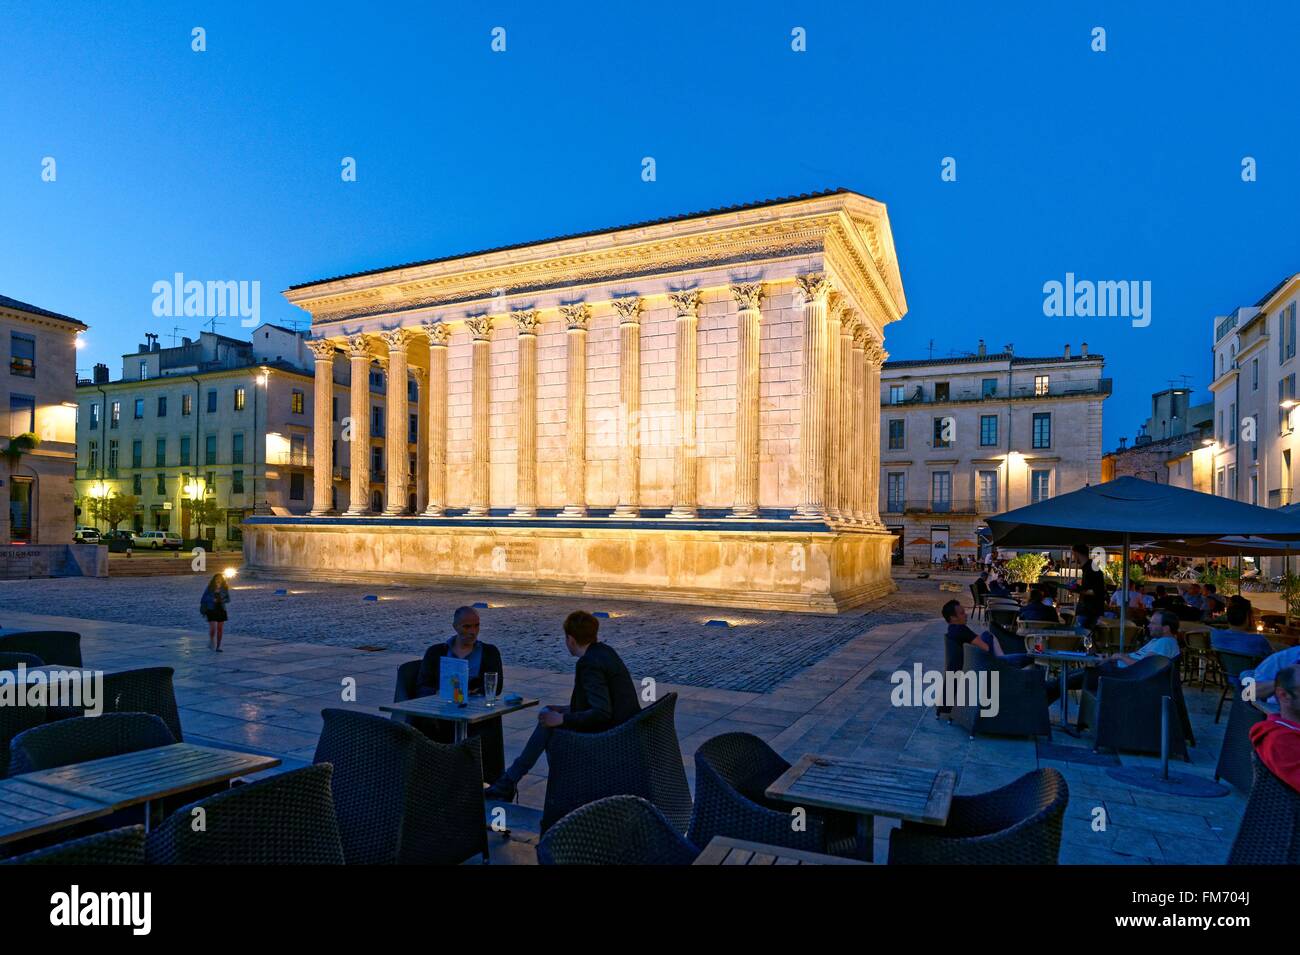 France, Gard, Nimes, Maison Carree, old Roman Temple of the 1st century BC, Contemporary Art museum Stock Photo